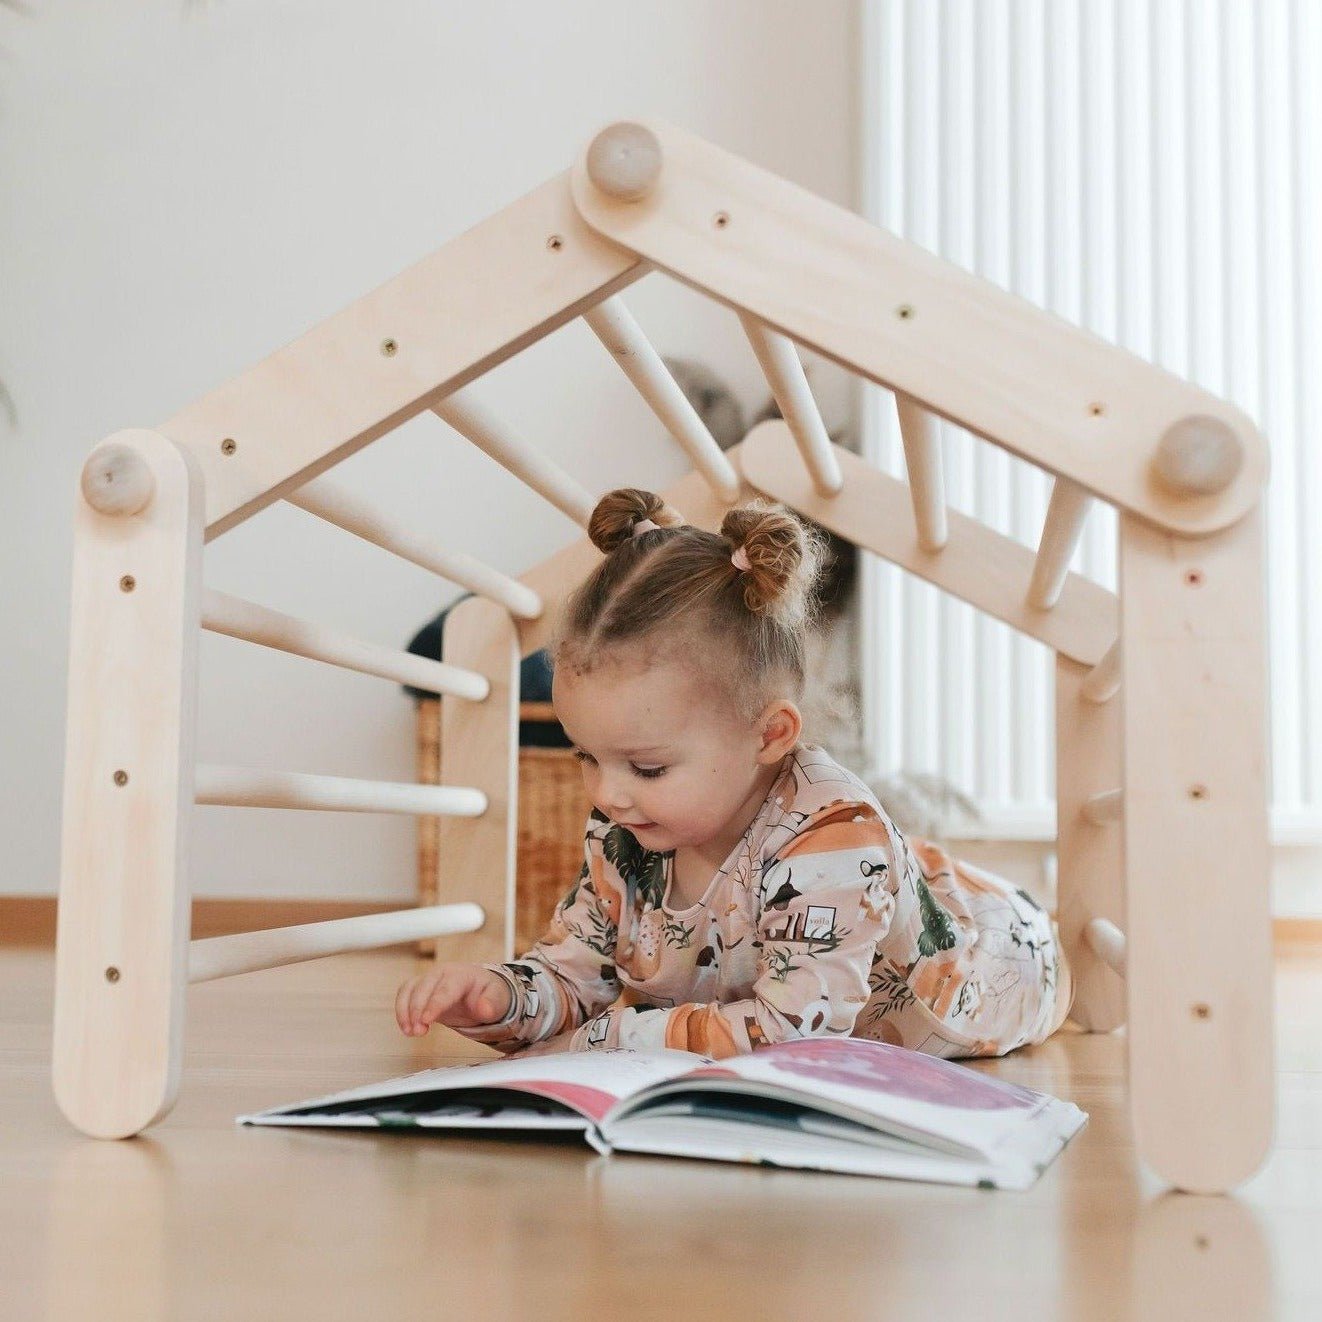 Modifiable climbing frame MOPITRI®, inspired by Emmi Pikler - Ette Tete